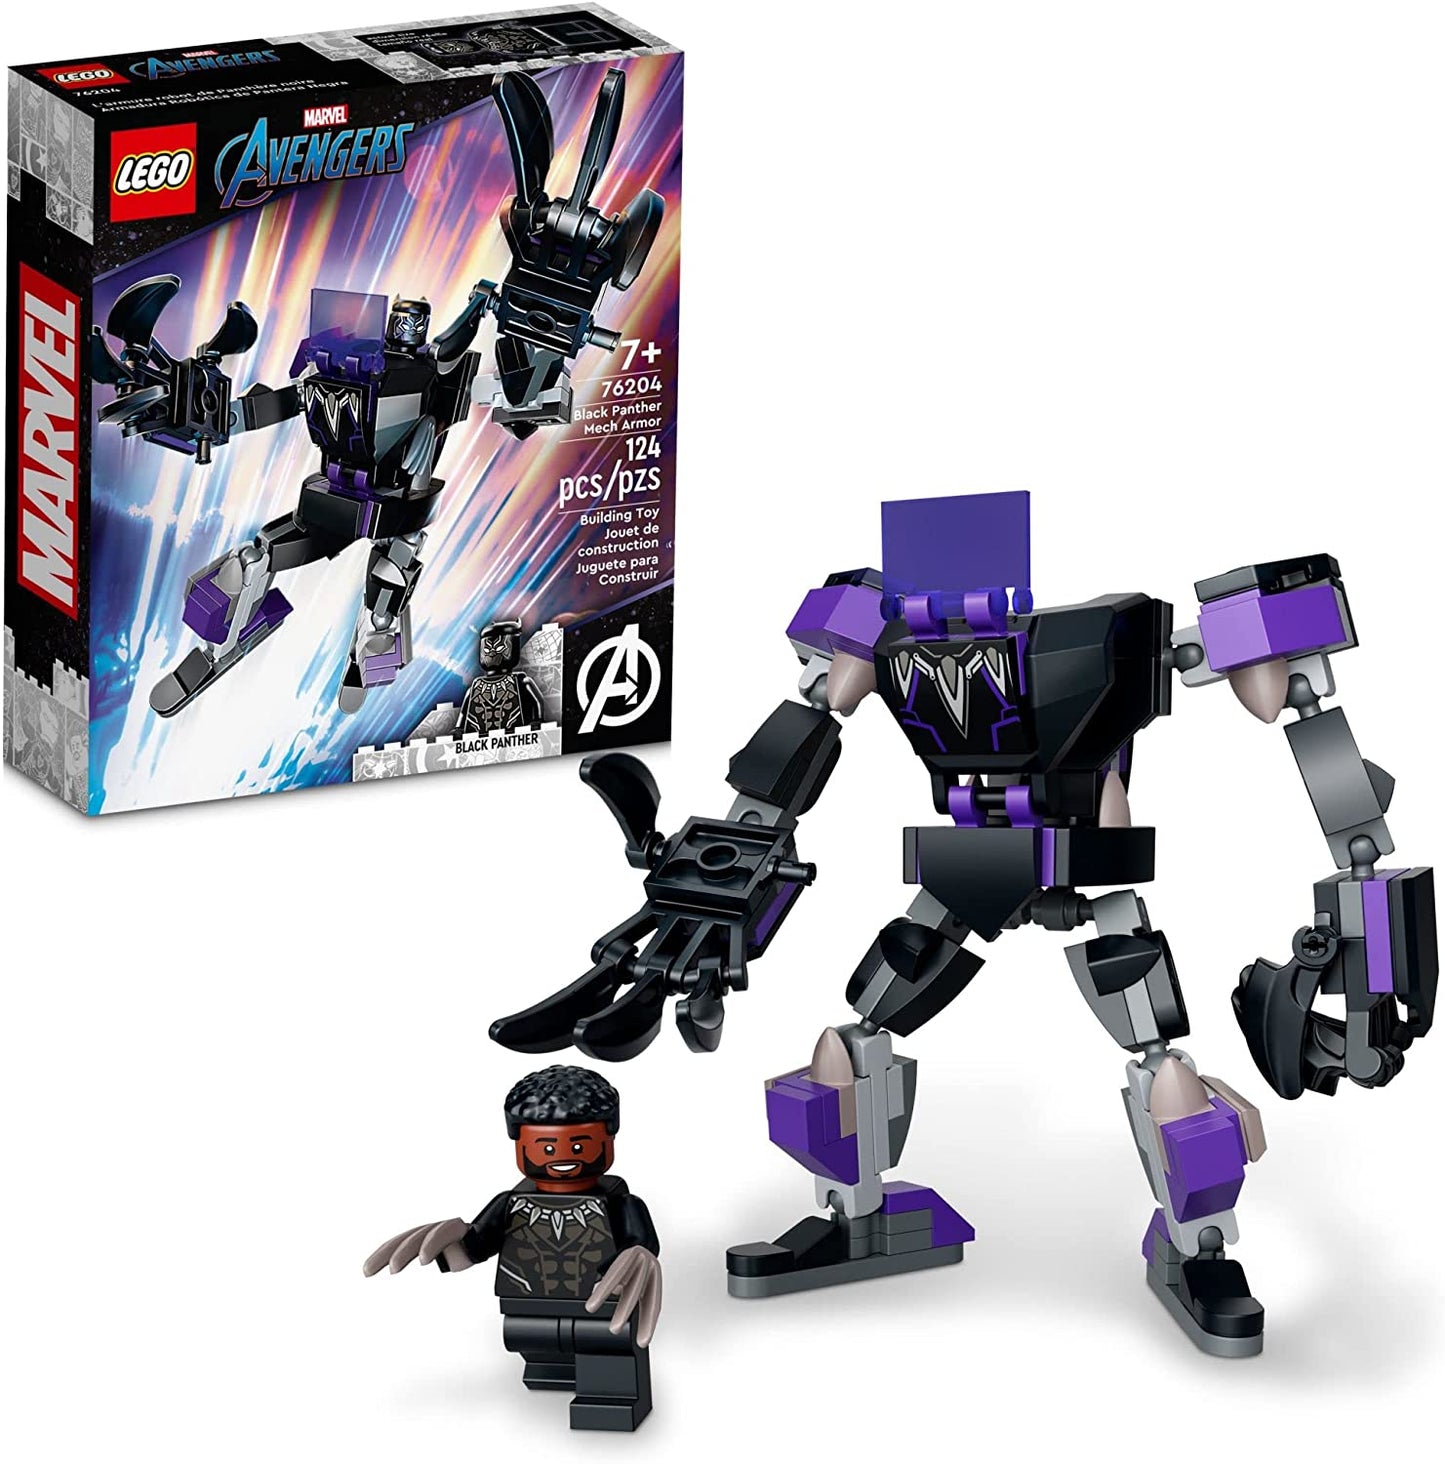 LEGO Marvel Black Panther Mech Armor 76204 Building Kit; Collectible Mech and Minifigure for Supe